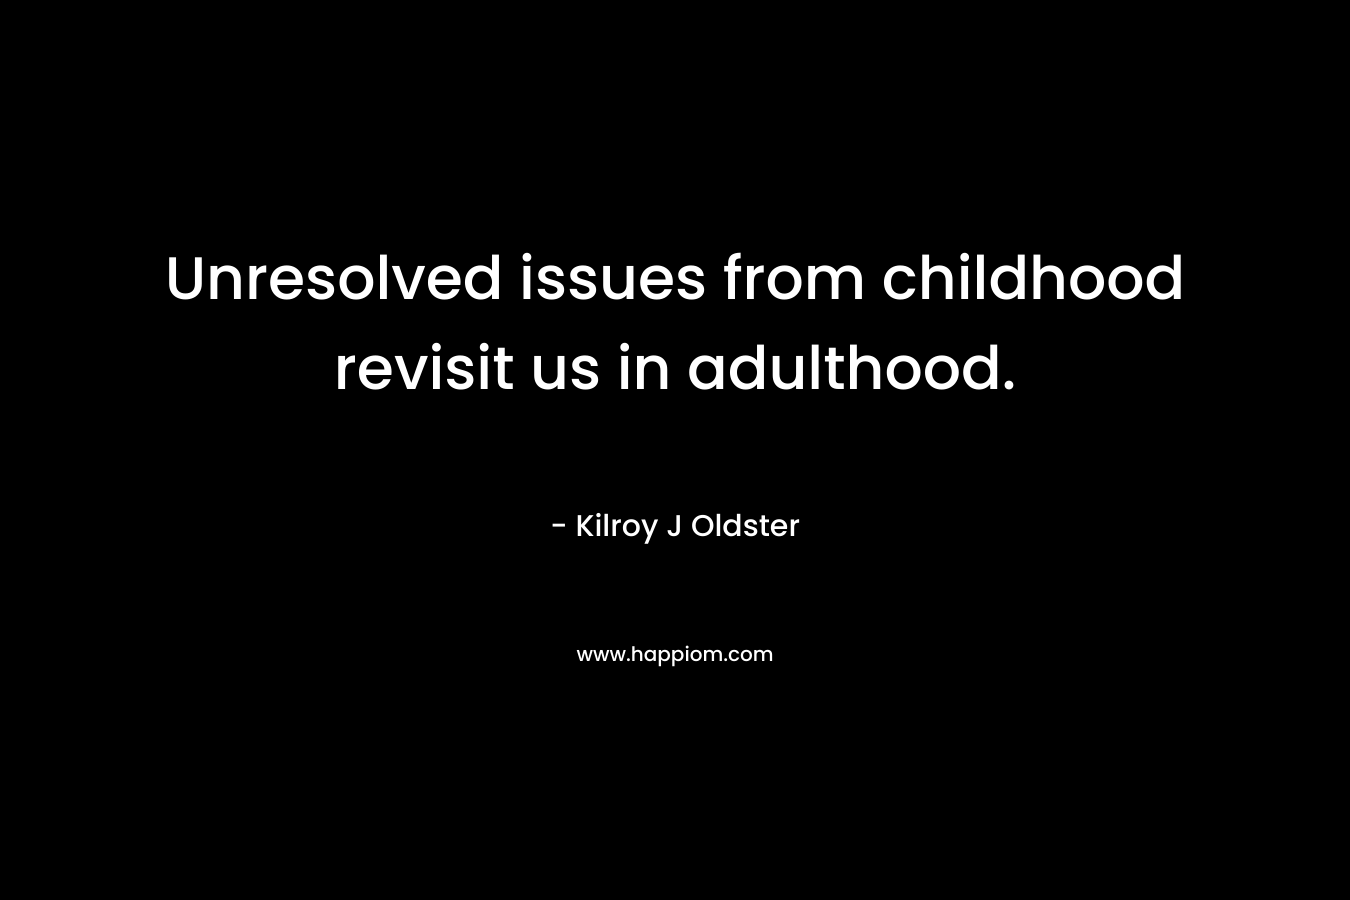 Unresolved issues from childhood revisit us in adulthood.